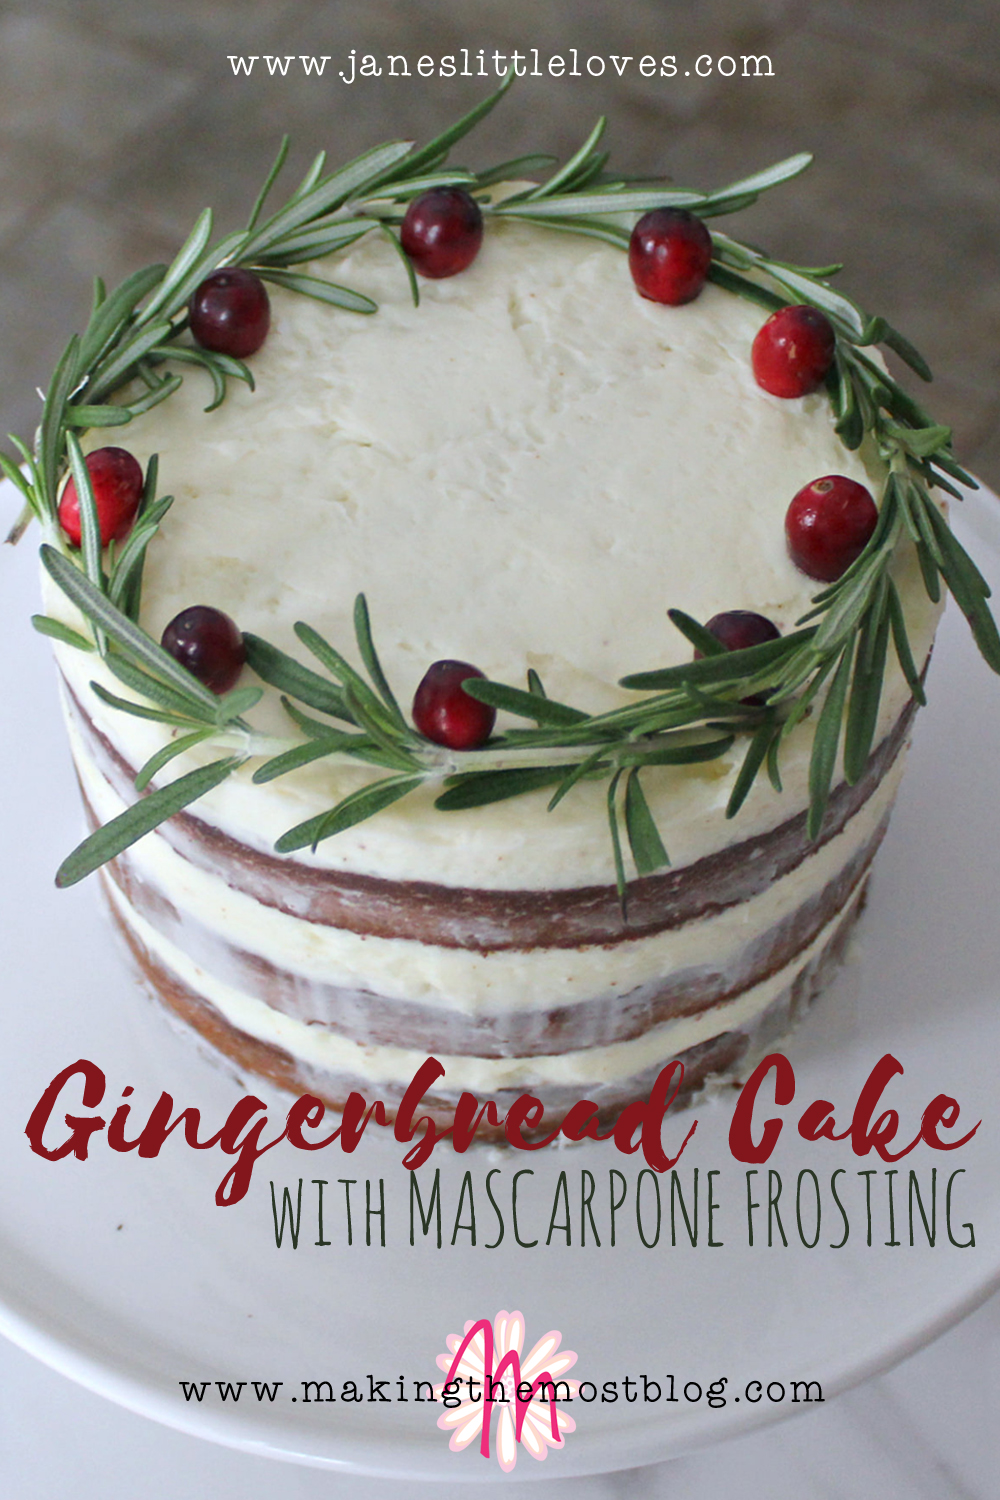 Gingerbread Cake with Marscapone Frosting Recipe | Making the Most Blog